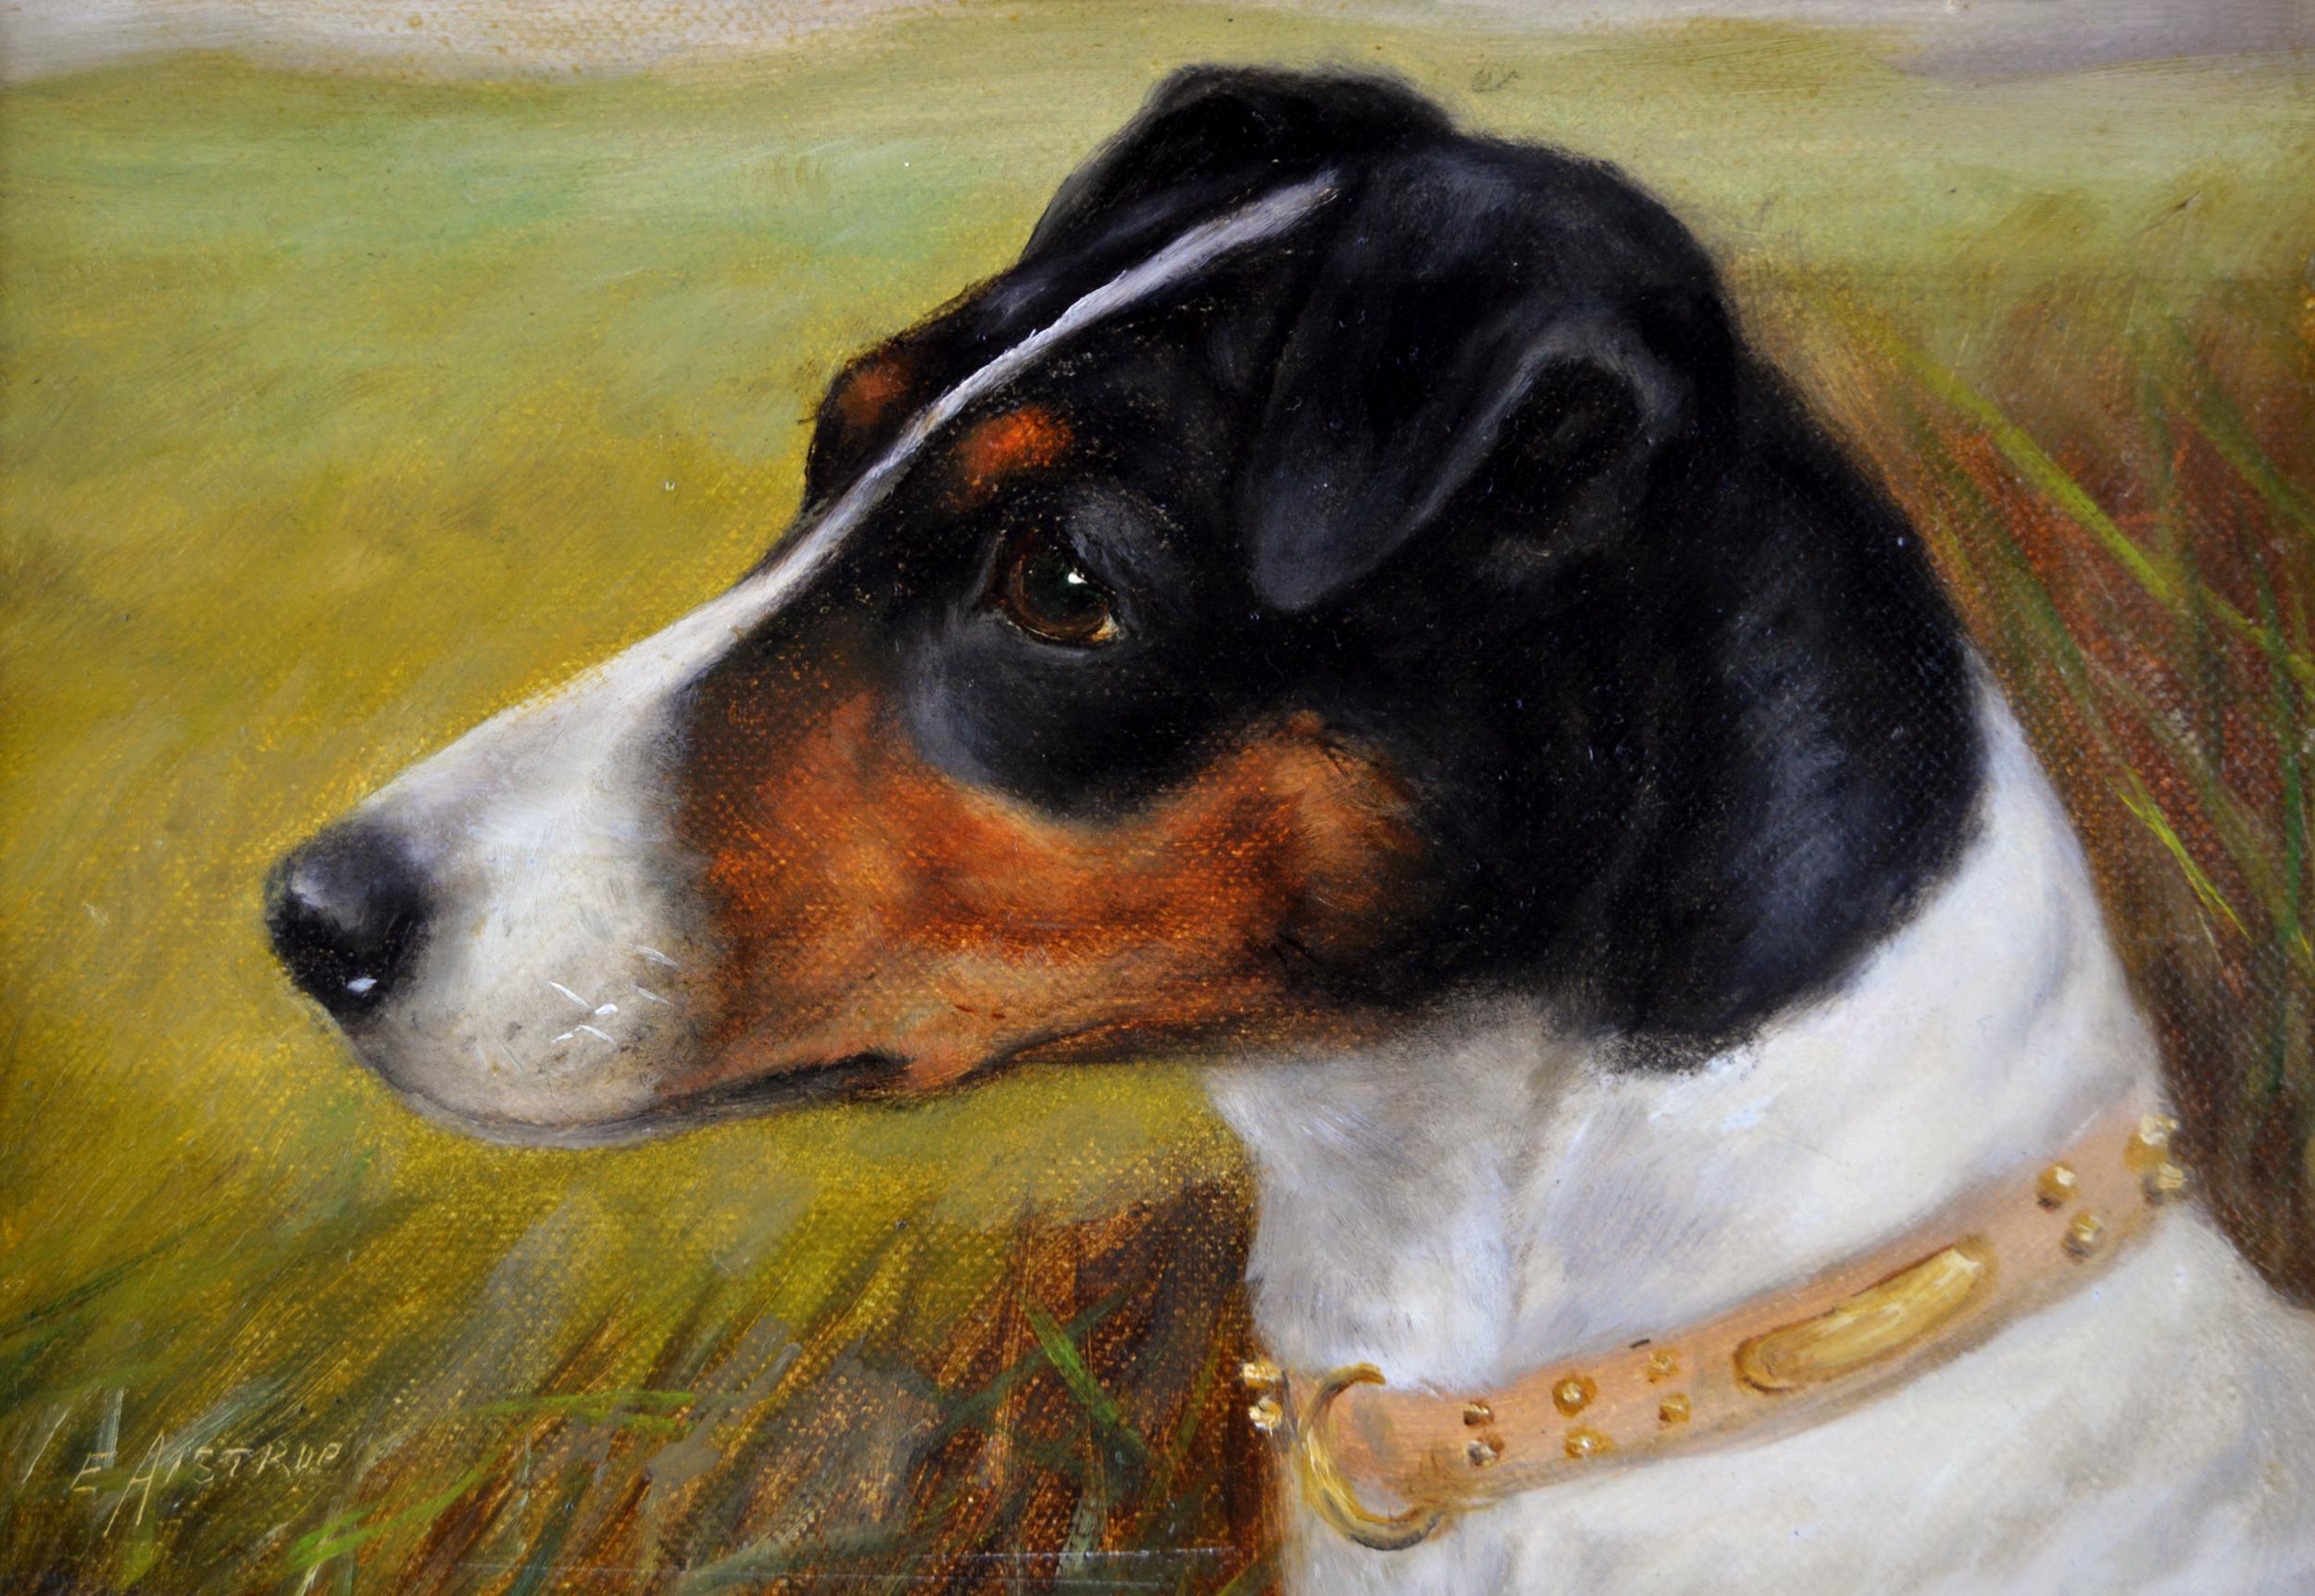 Edward Aistrop
British, (act. 1880-1920)	
Meersbrook Bristles & Brockenhurst Minor
Oil on canvas board, pair, both signed
Image size: 5.5 inches x 8 inches 
Size including frame: 9.5 inches x 12 inches

Edward Aistrop was a painter of dog portraits